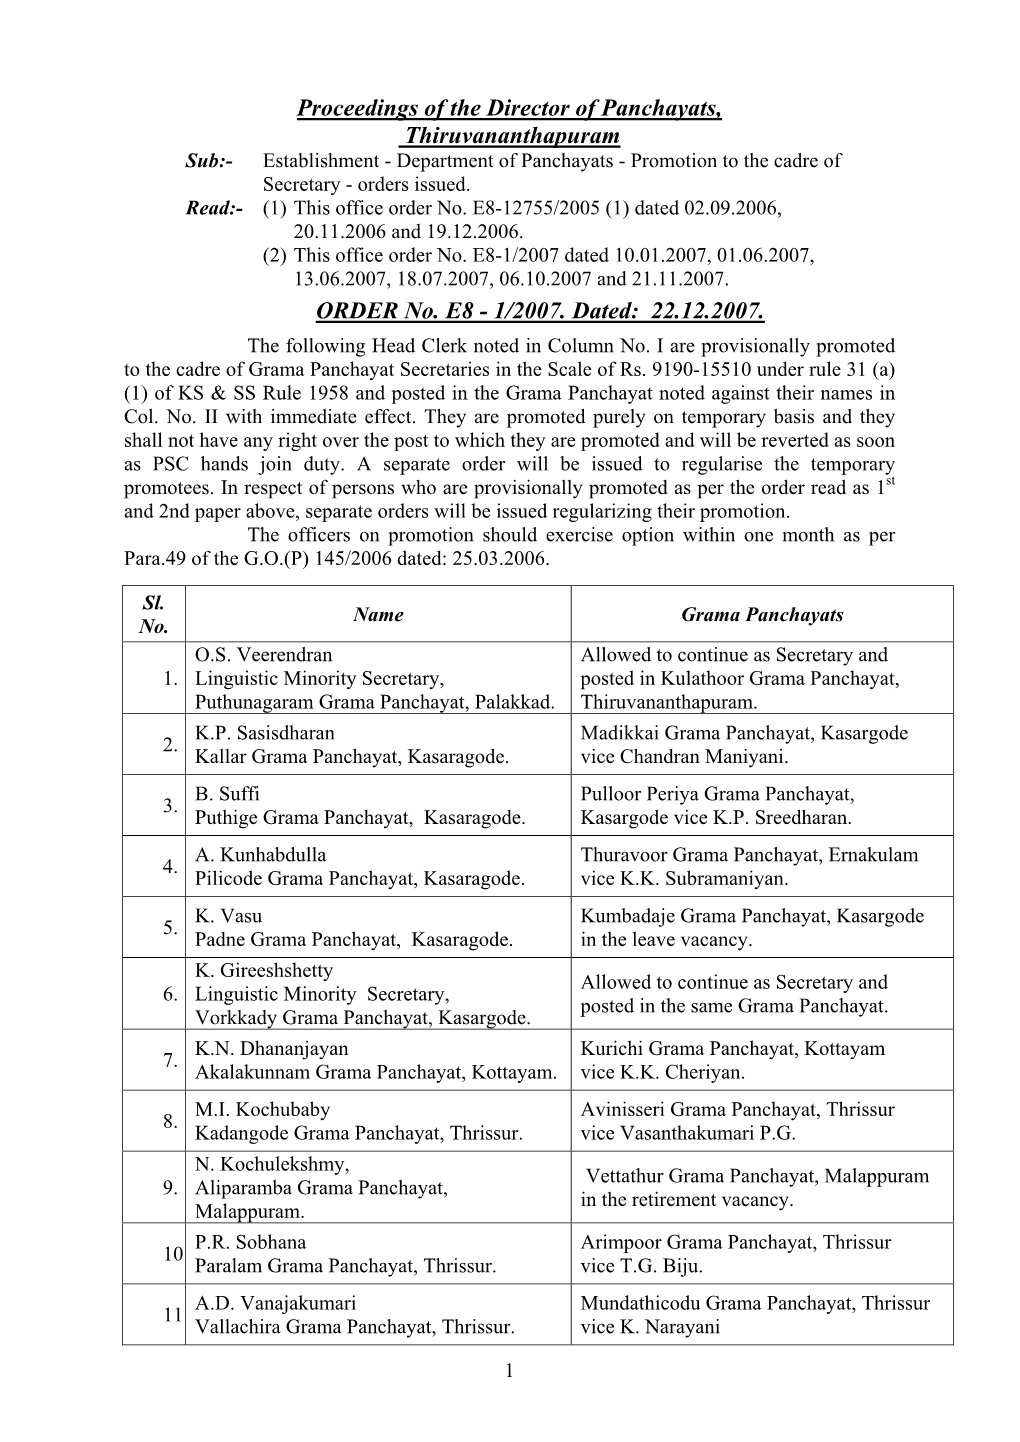 Proceedings of the Director of Panchayats, Thiruvananthapuram Sub:- Establishment - Department of Panchayats - Promotion to the Cadre of Secretary - Orders Issued